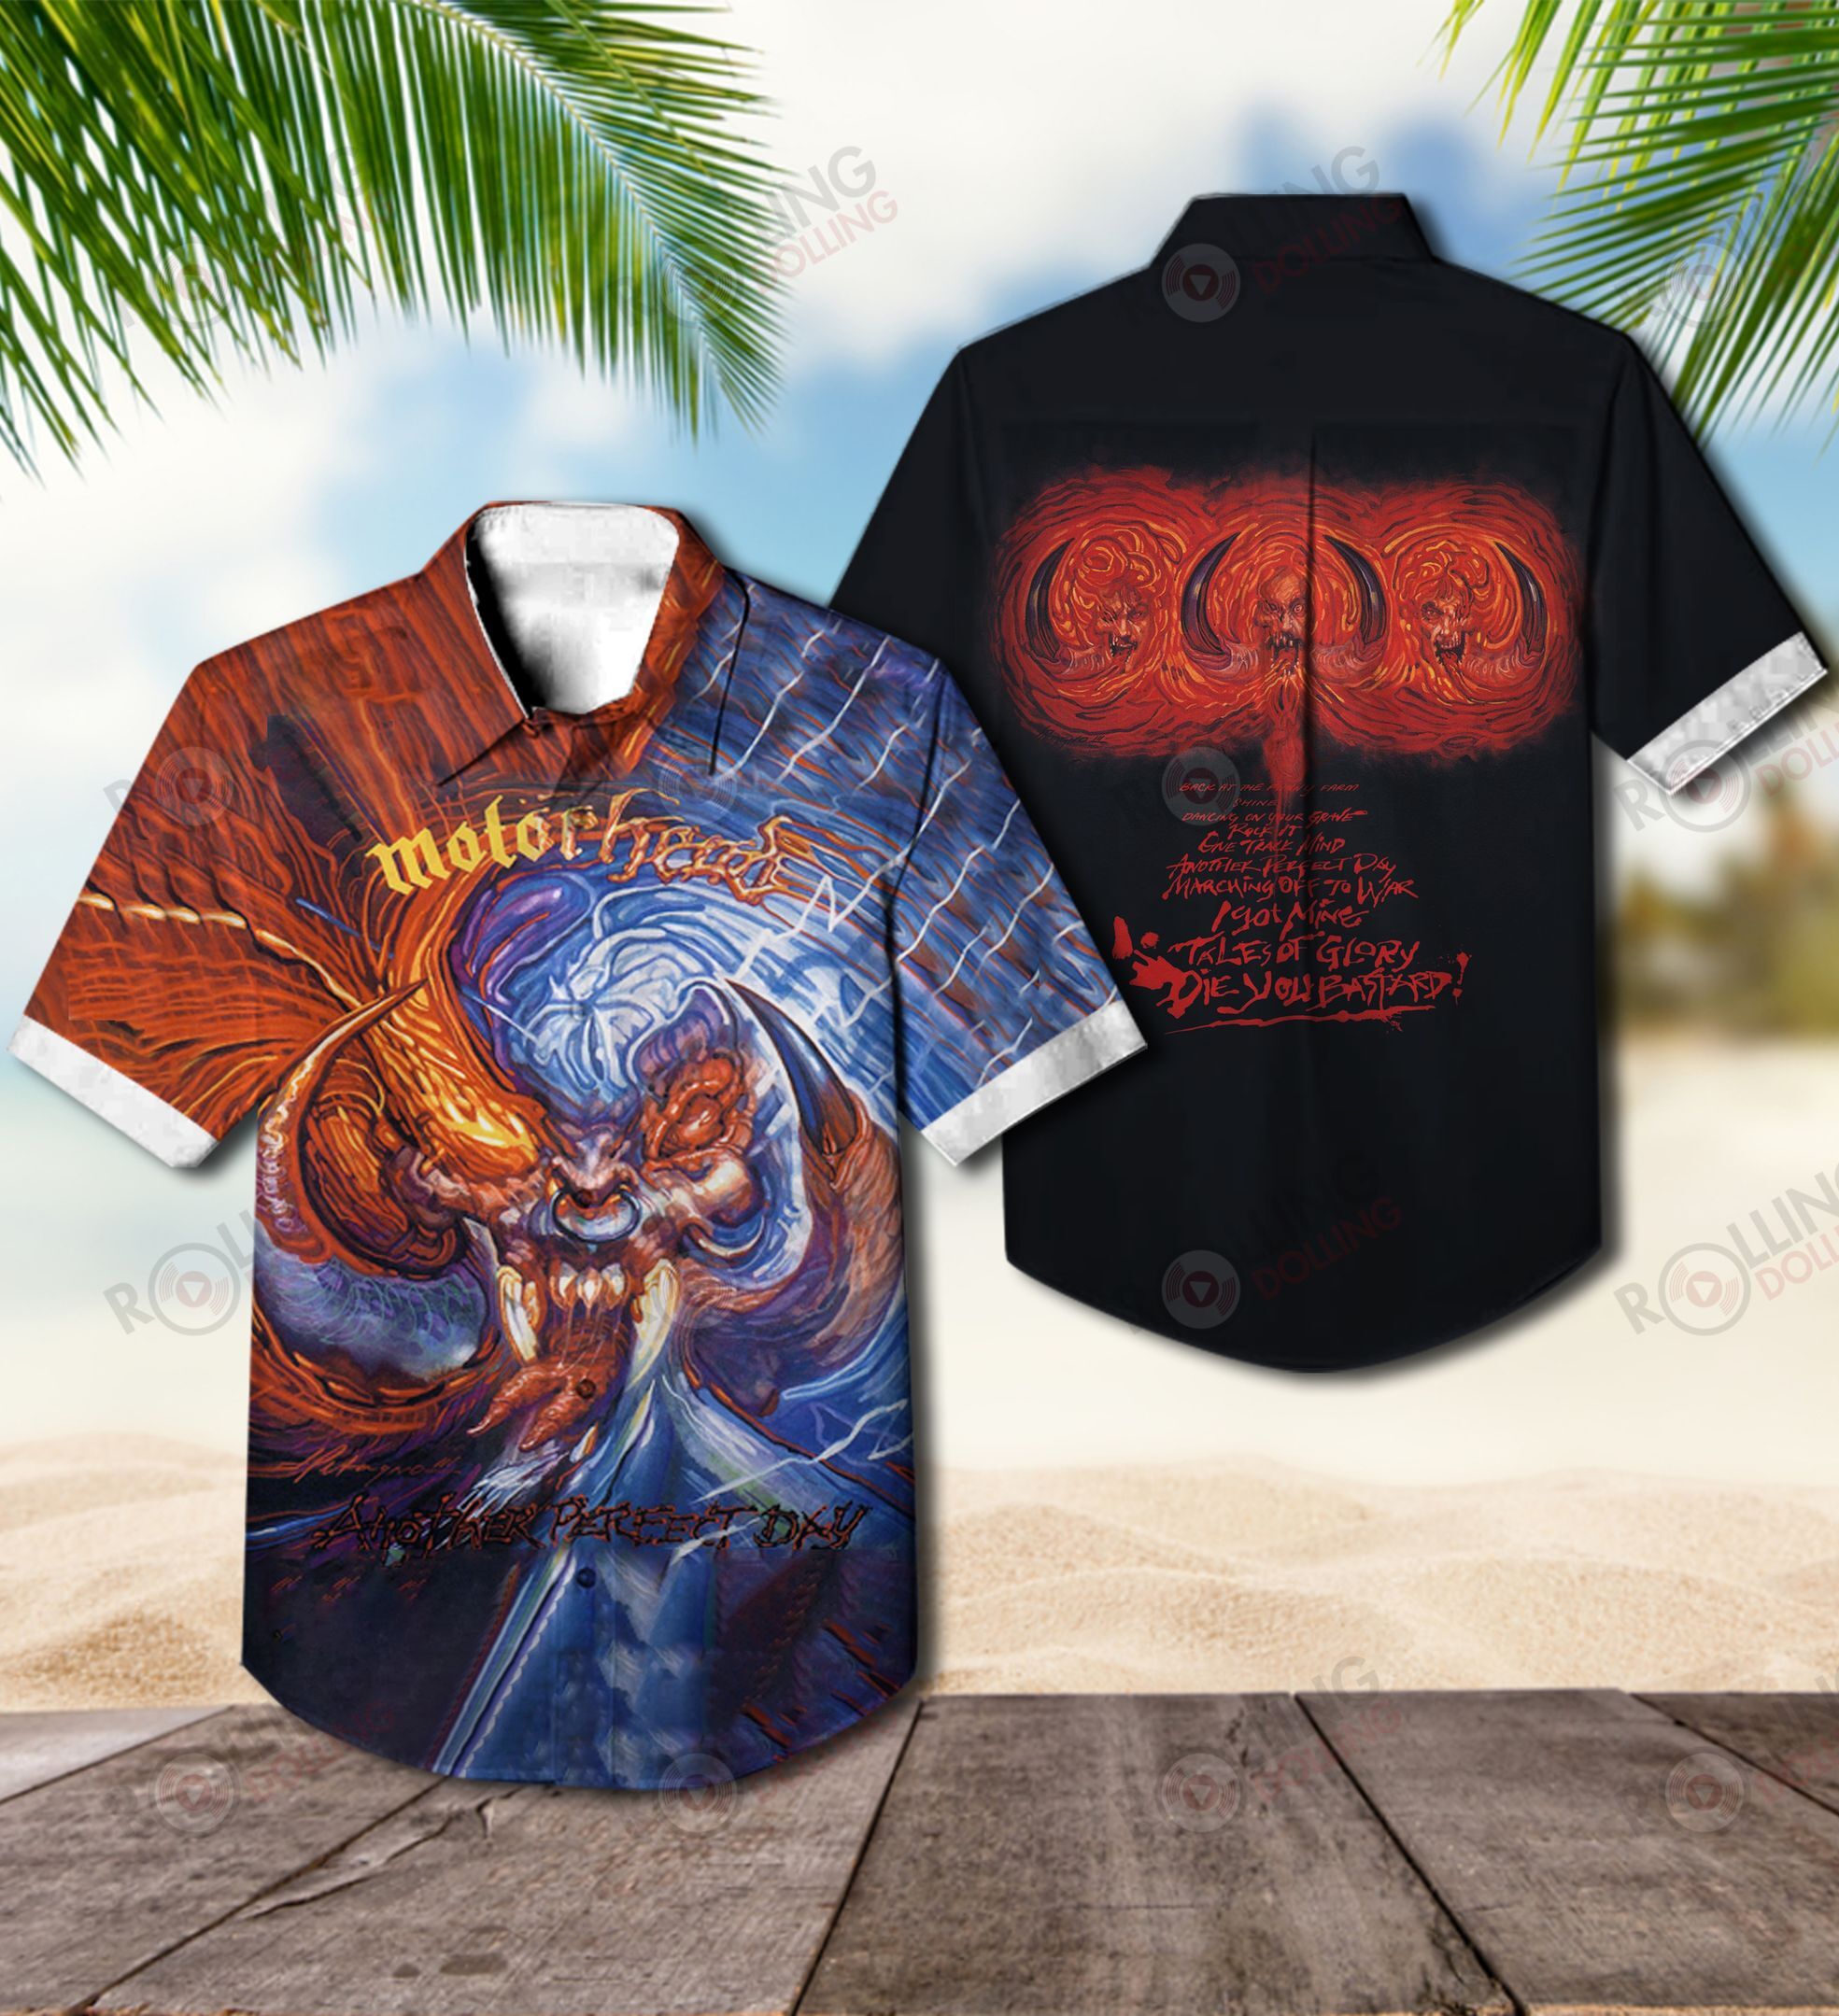 Check out these top 100+ Hawaiian shirt so cool for rock fans 303